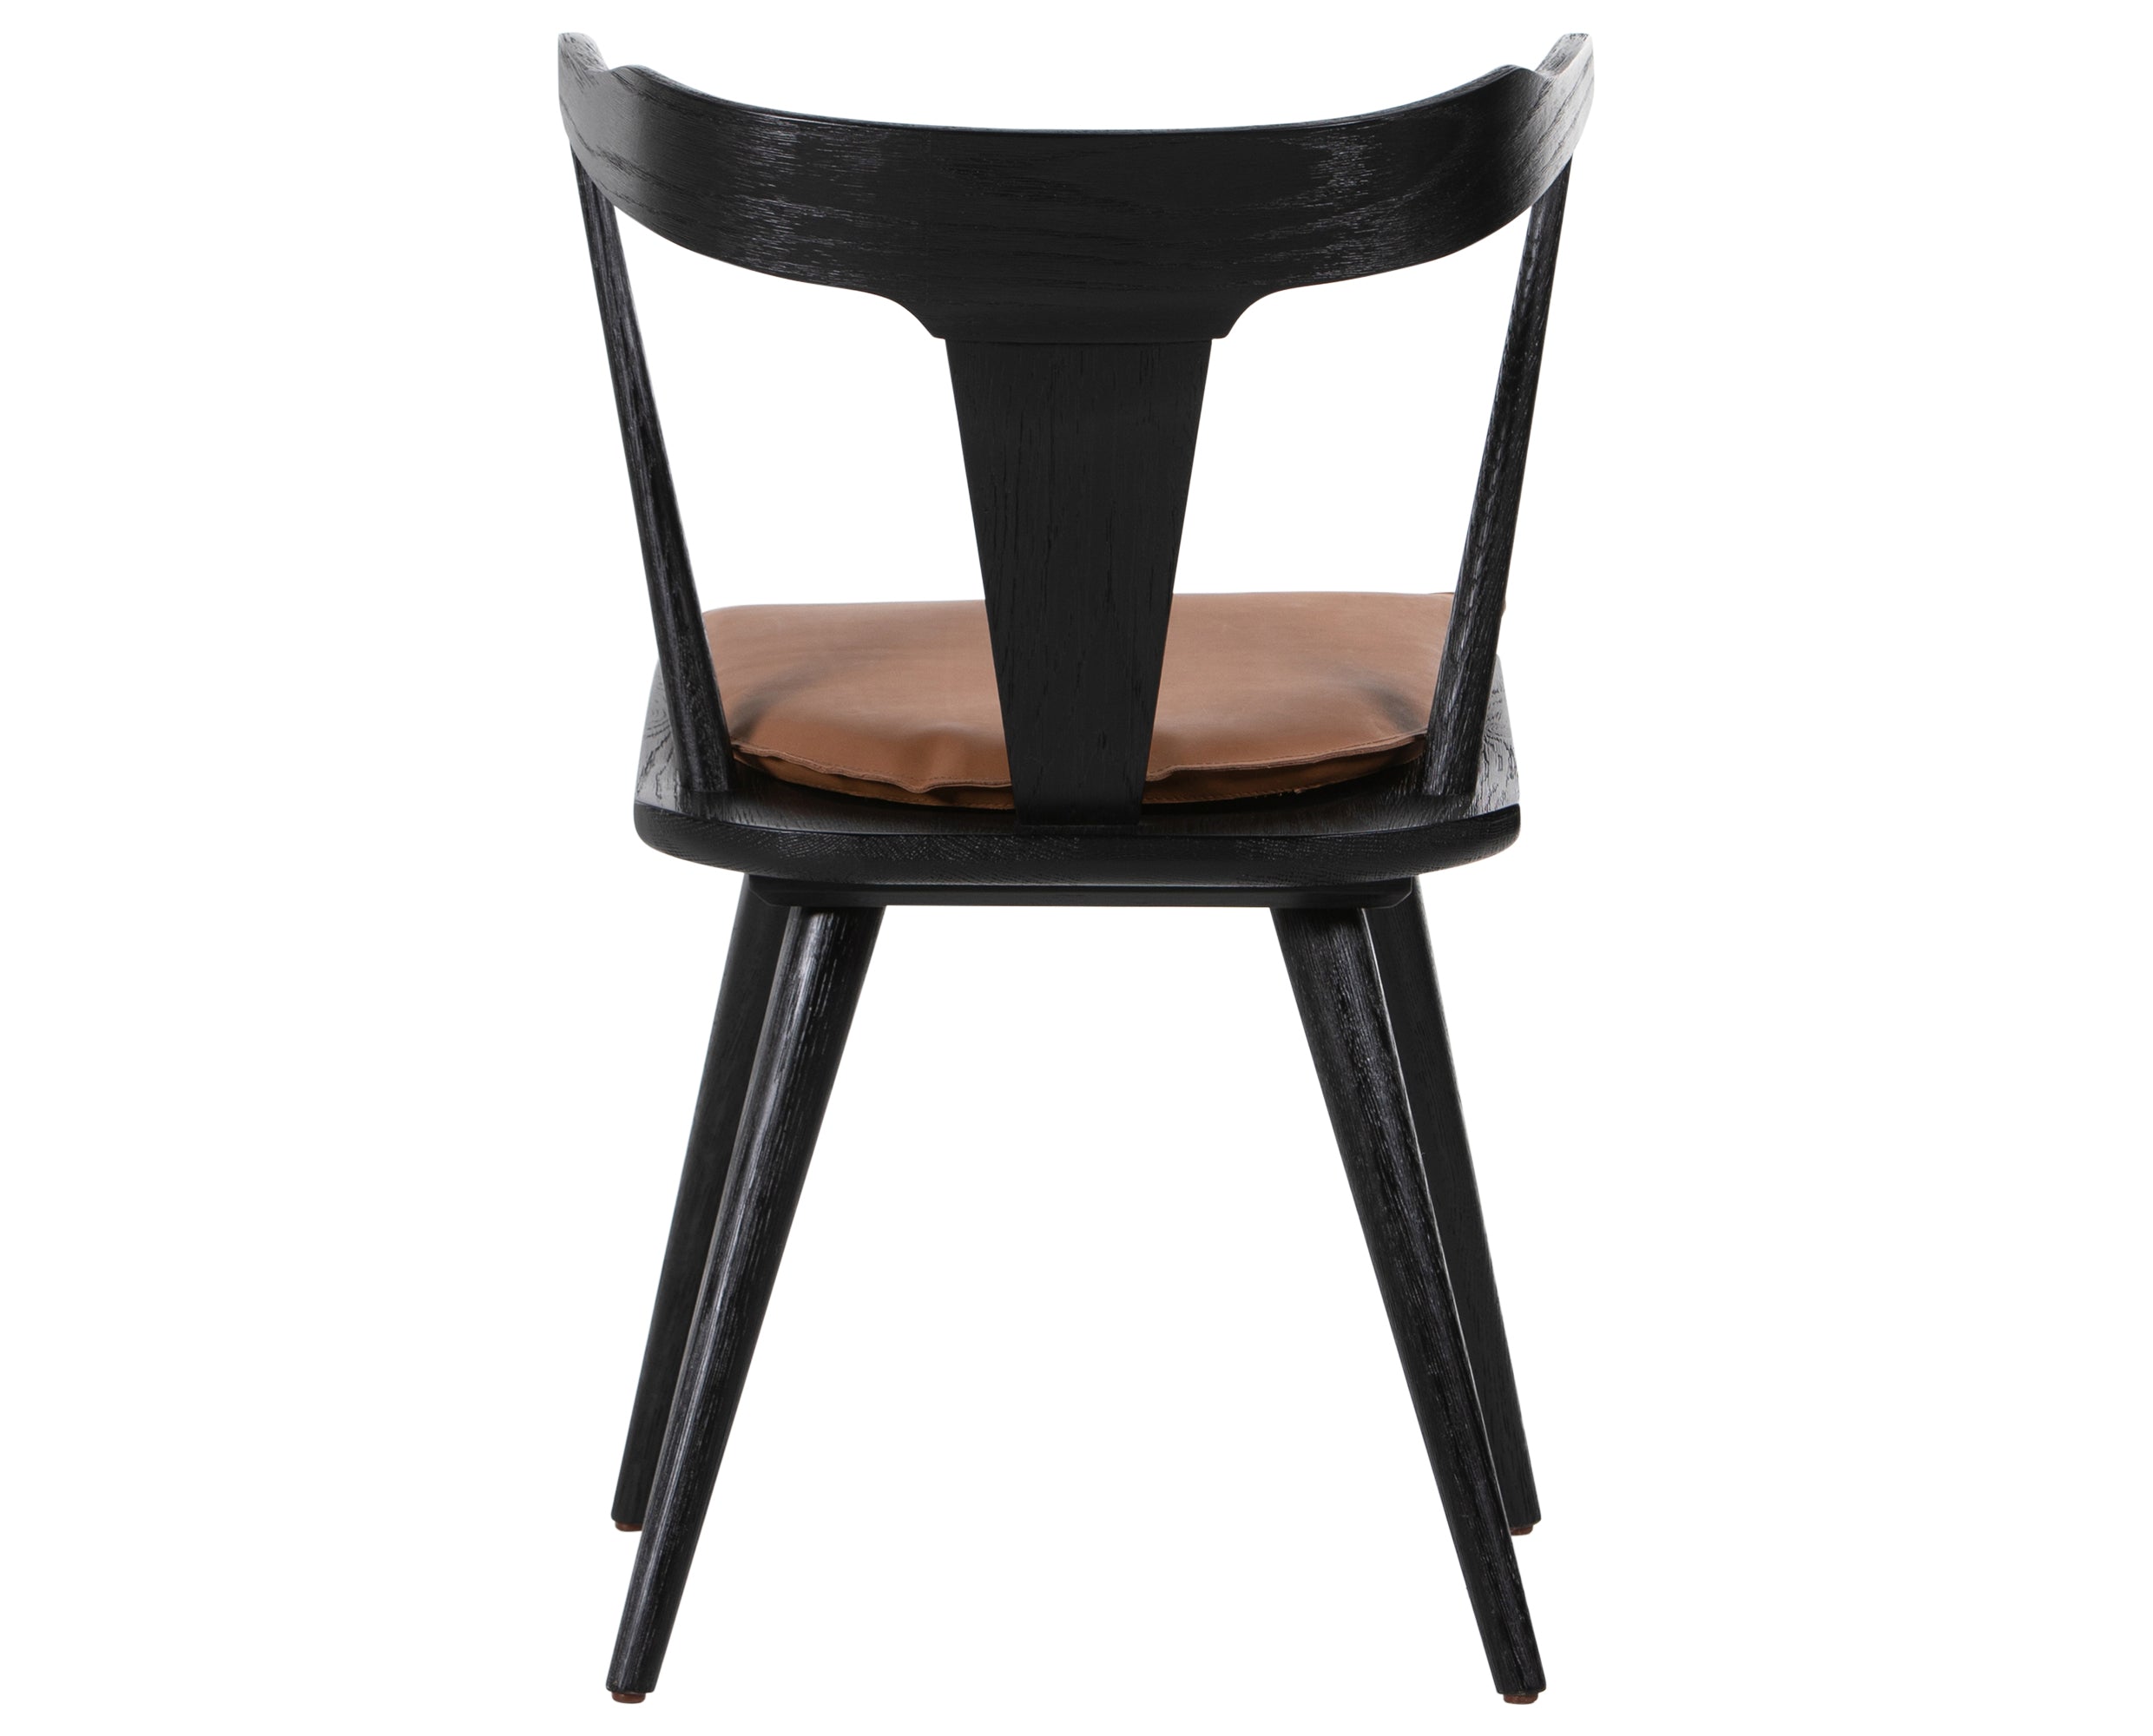 Black Oak and Whiskey Saddle Leather with Ivory Backing Fabric | Ripley Dining Chair | Valley Ridge Furniture